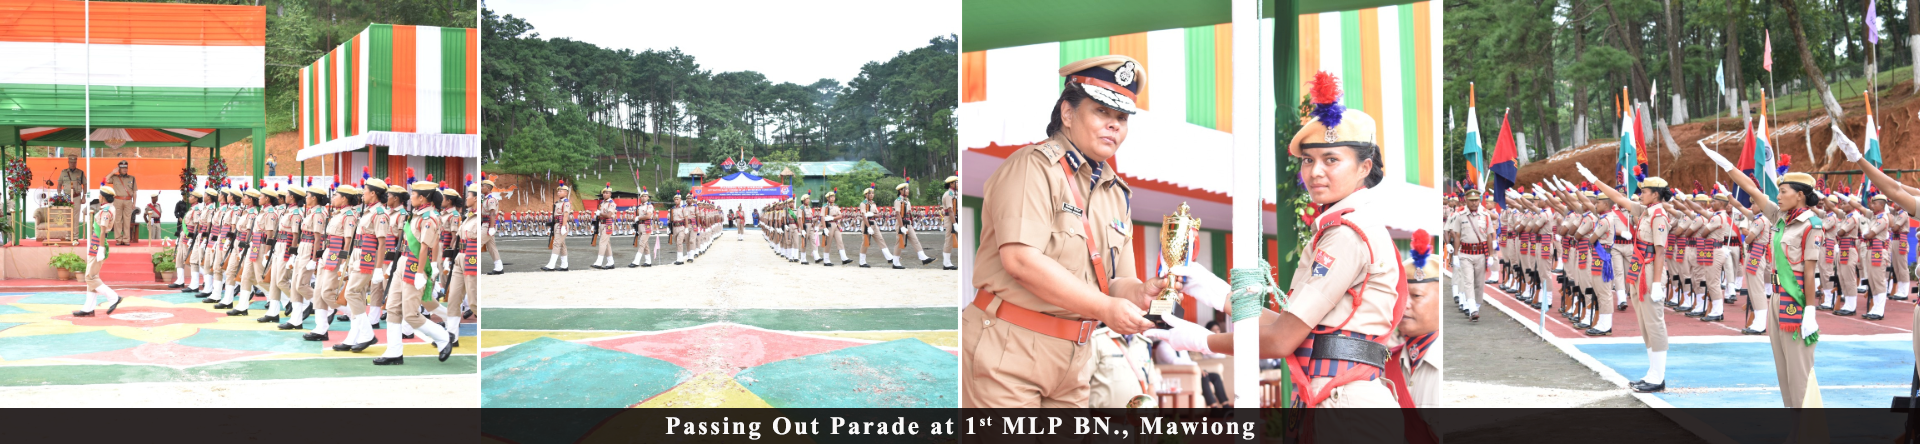 Passing Out Parade at 1st MLP Bn., Mawiong